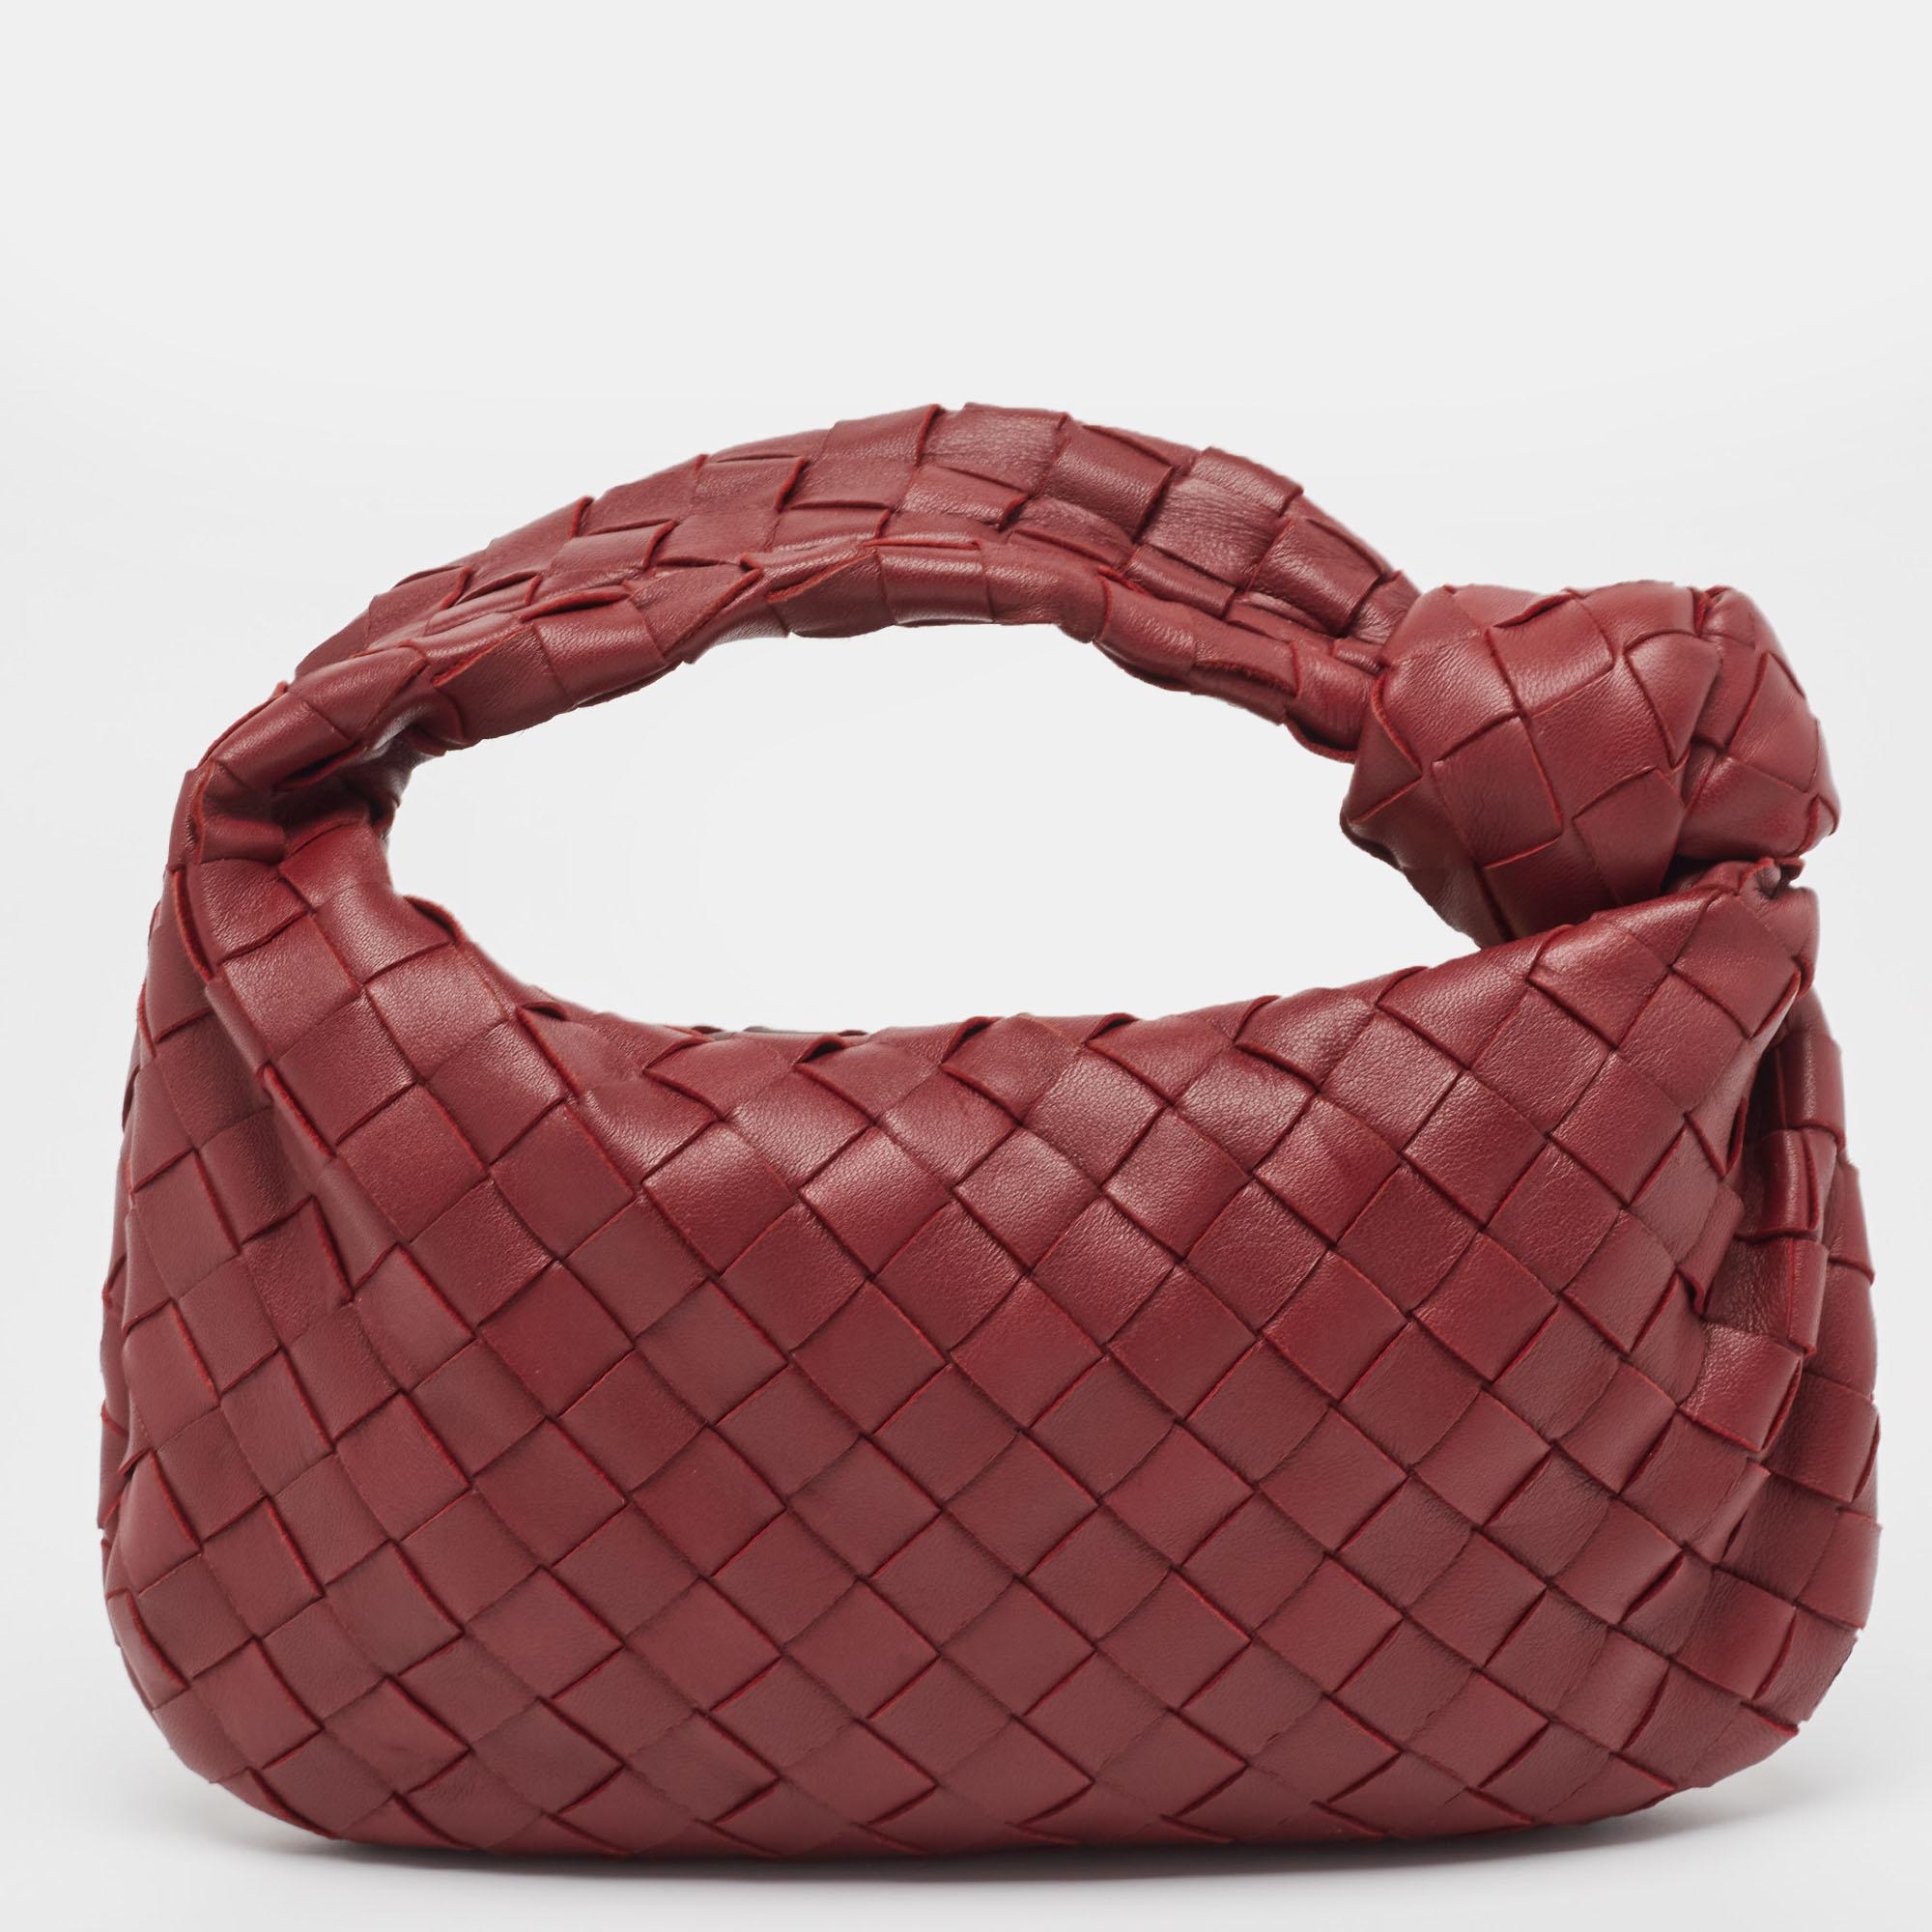 This Bottega Veneta Jodie bag is crafted from leather using their signature Intrecciato weaving technique into a seamless silhouette. This mini bag, personifying elegance and subtle charm, is held by a knotted handle. The bag has an interior sized